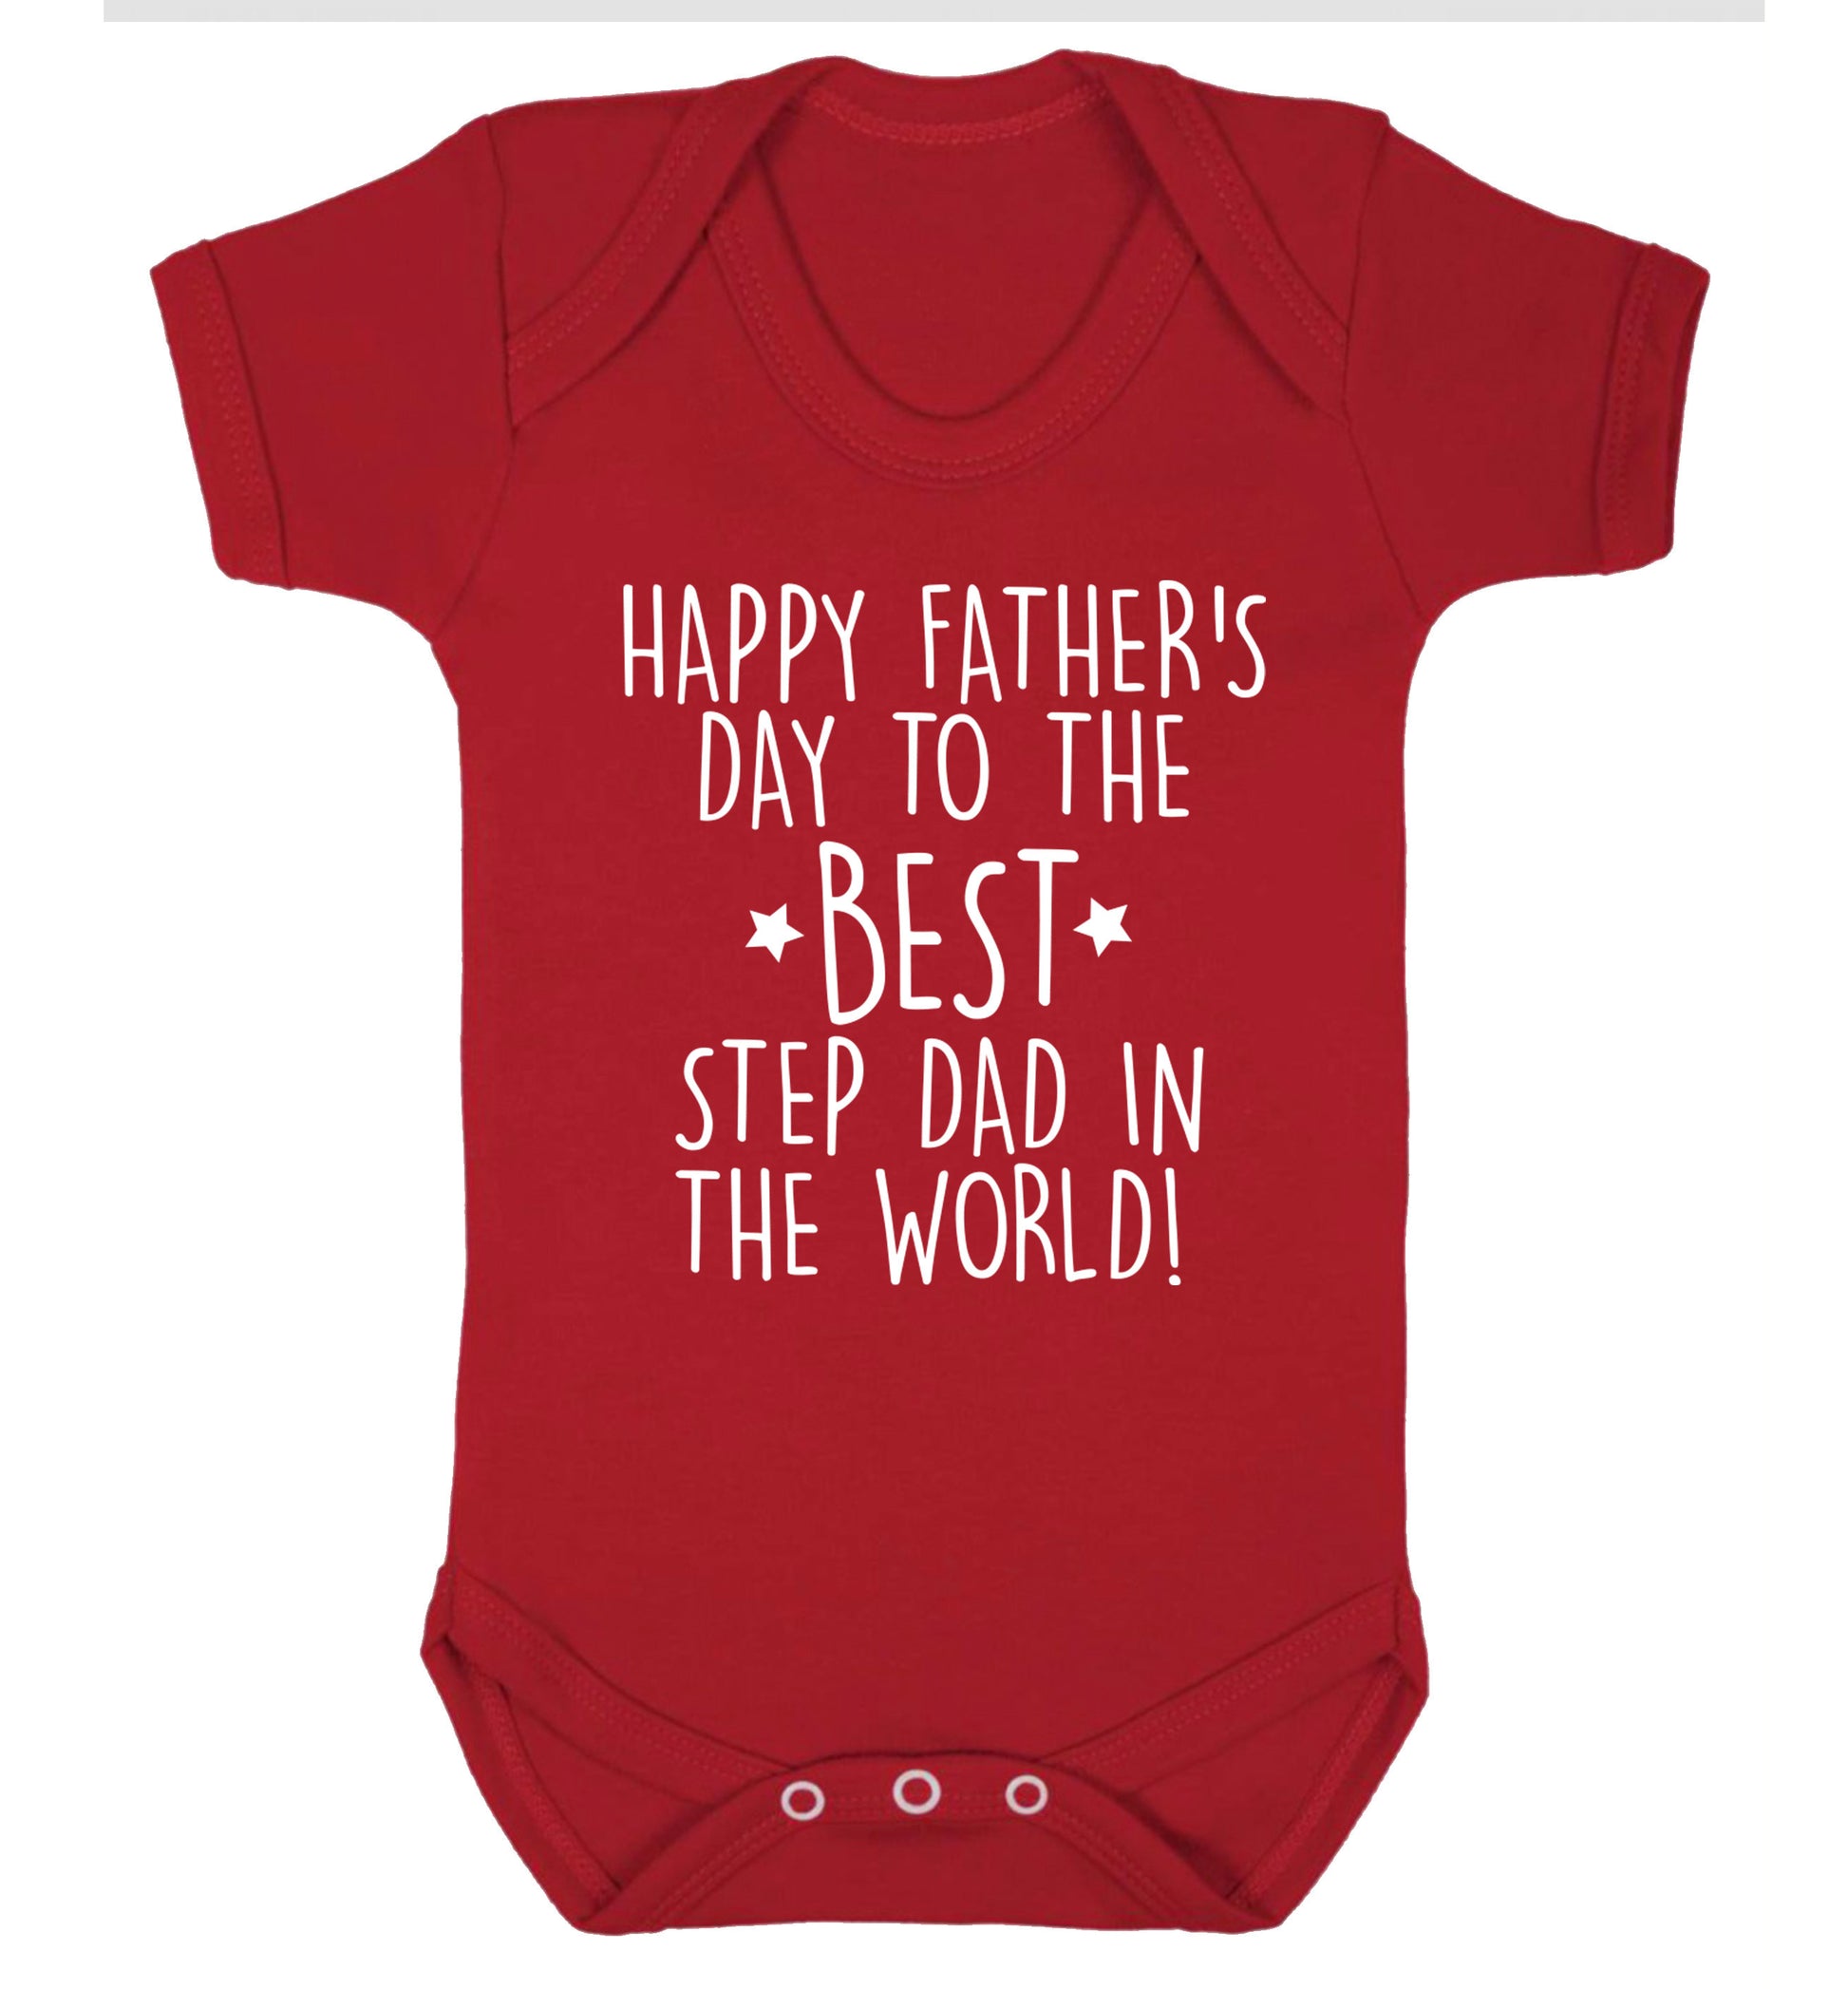 Happy Father's day to the best step dad in the world! Baby Vest red 18-24 months